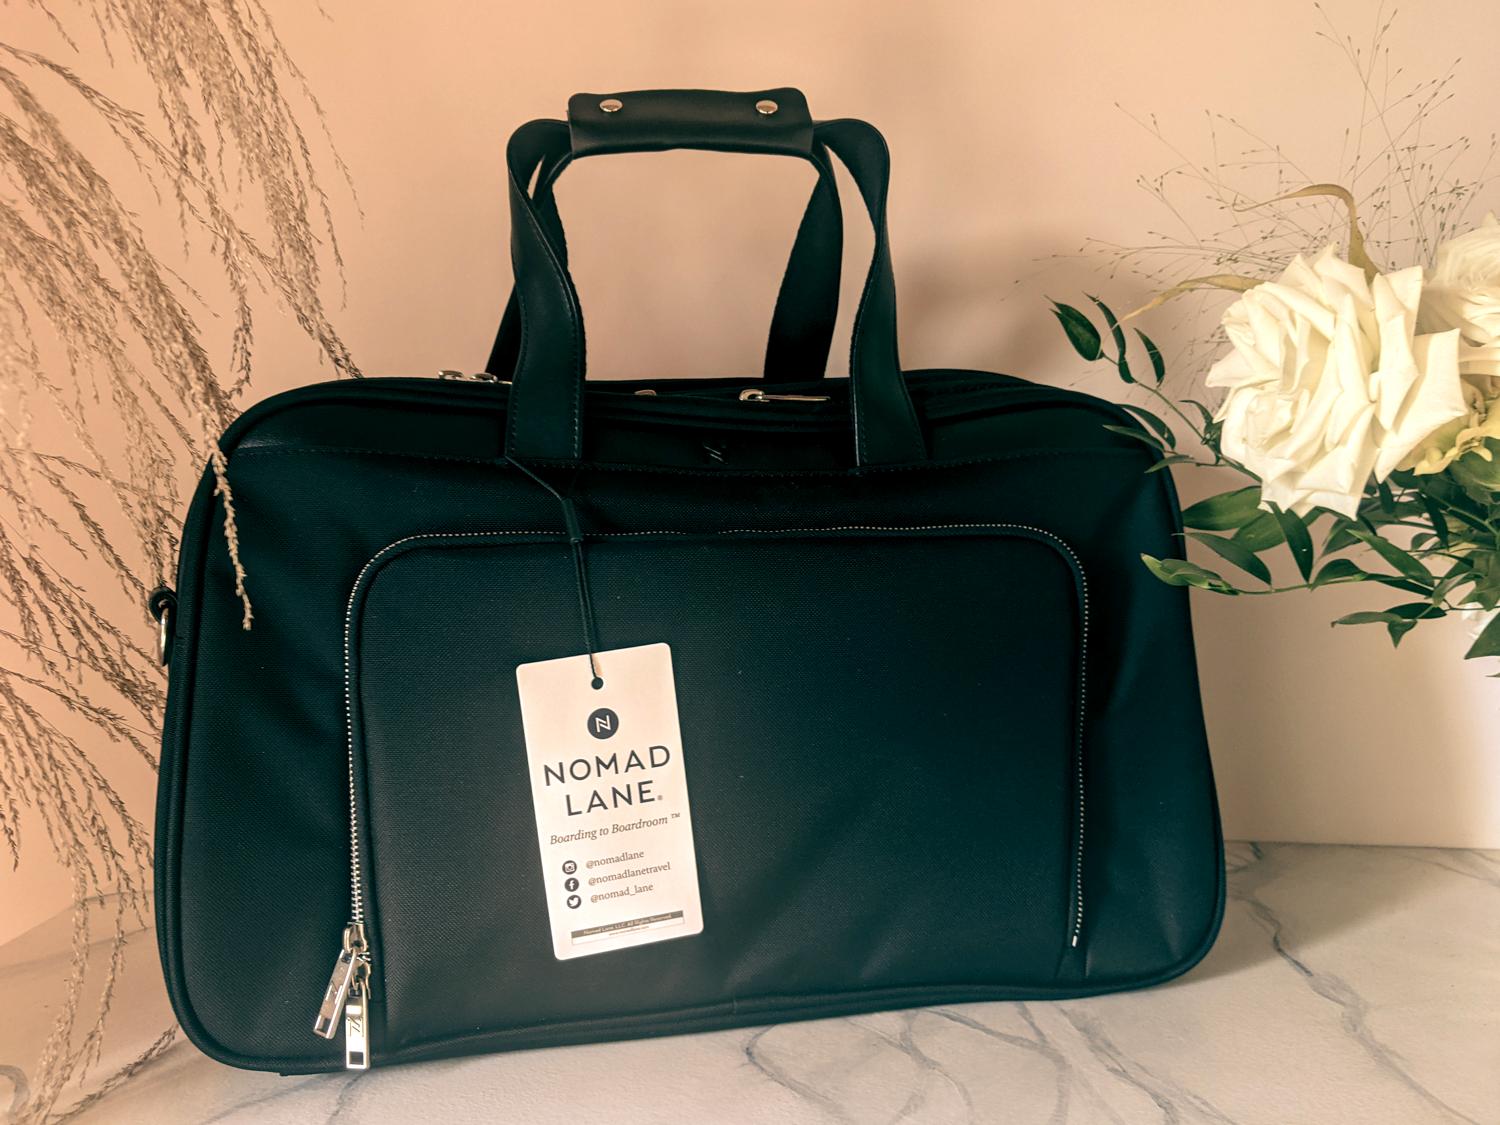 Review & Giveaway: Nomad Lane Bento Bag - One Mile at a Time